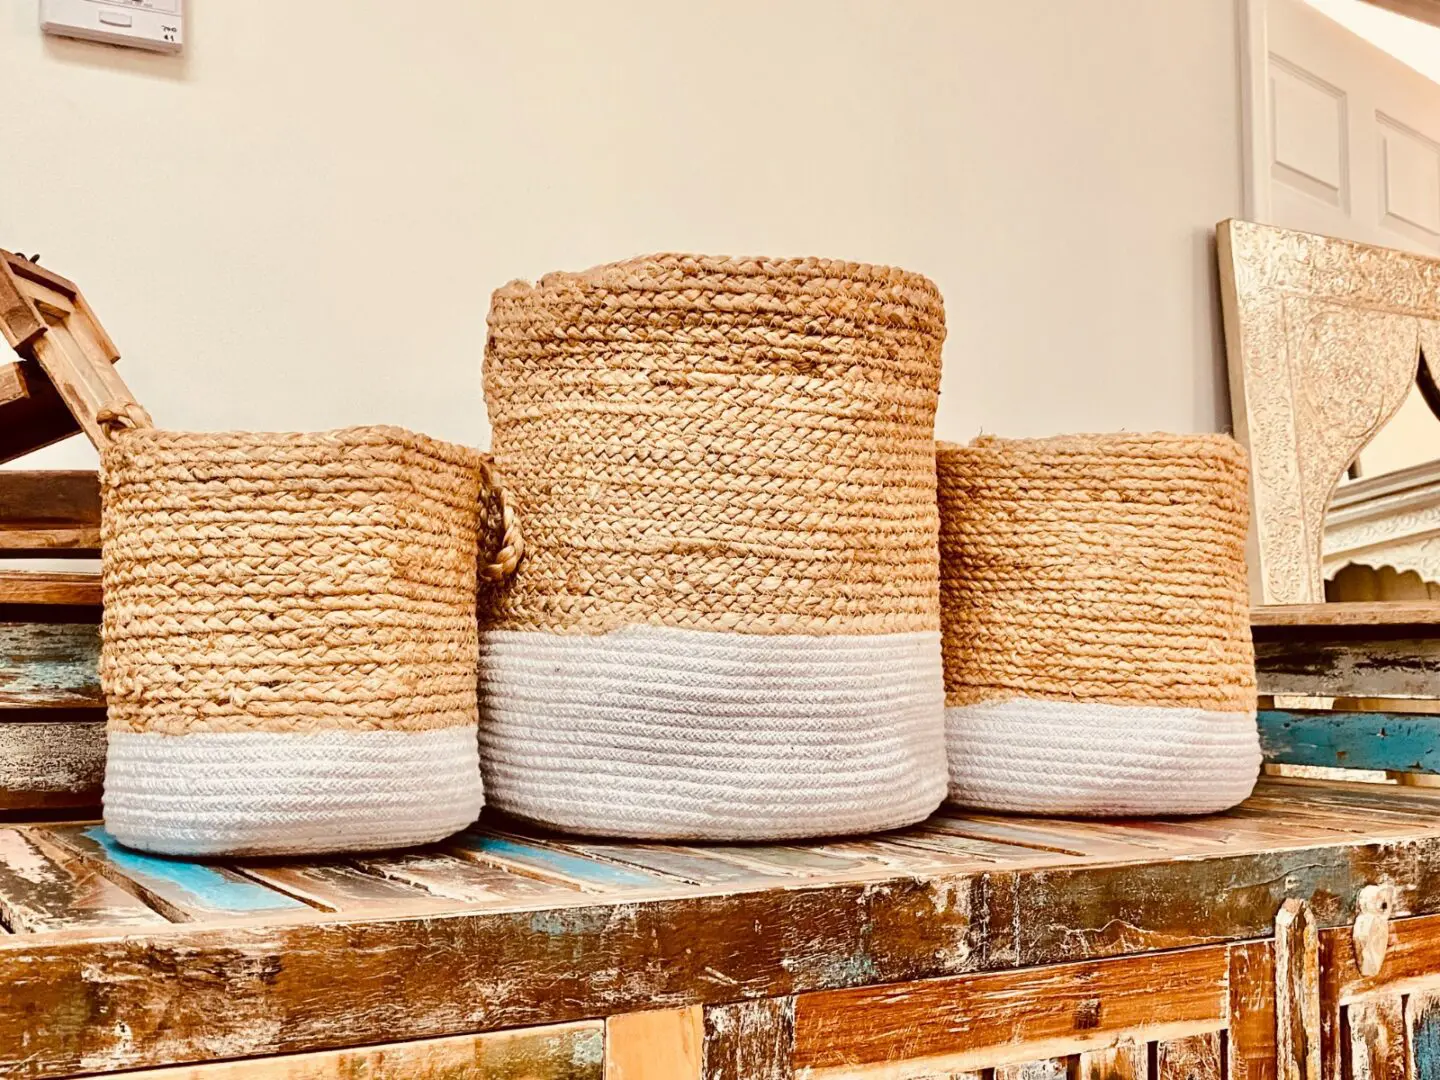 Three baskets are lined up on a table.